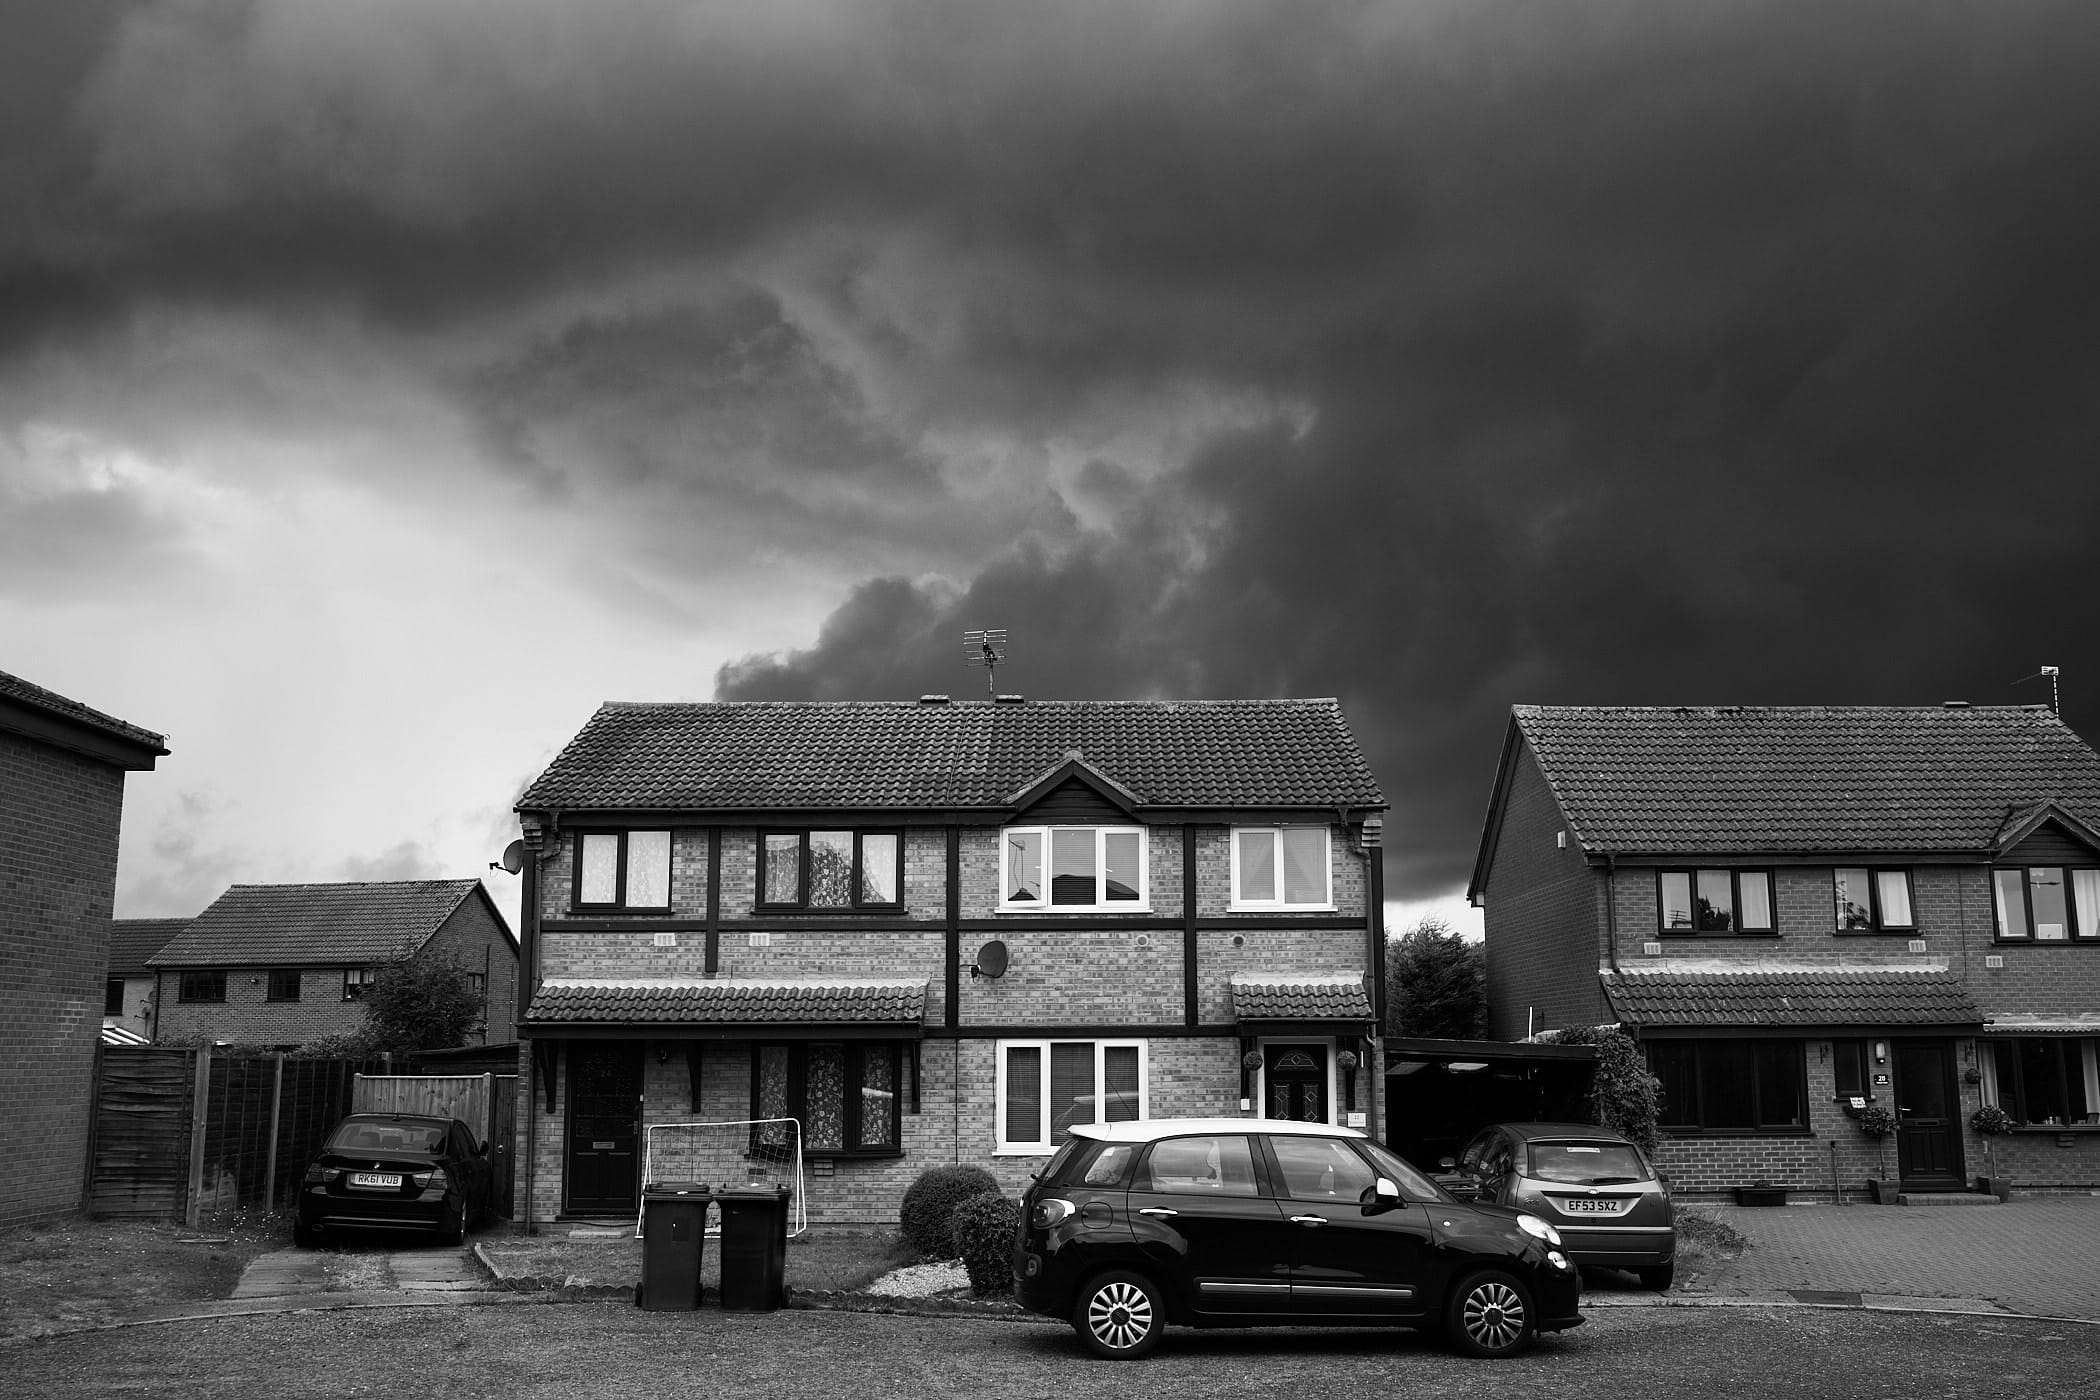 brewing storm behind houses